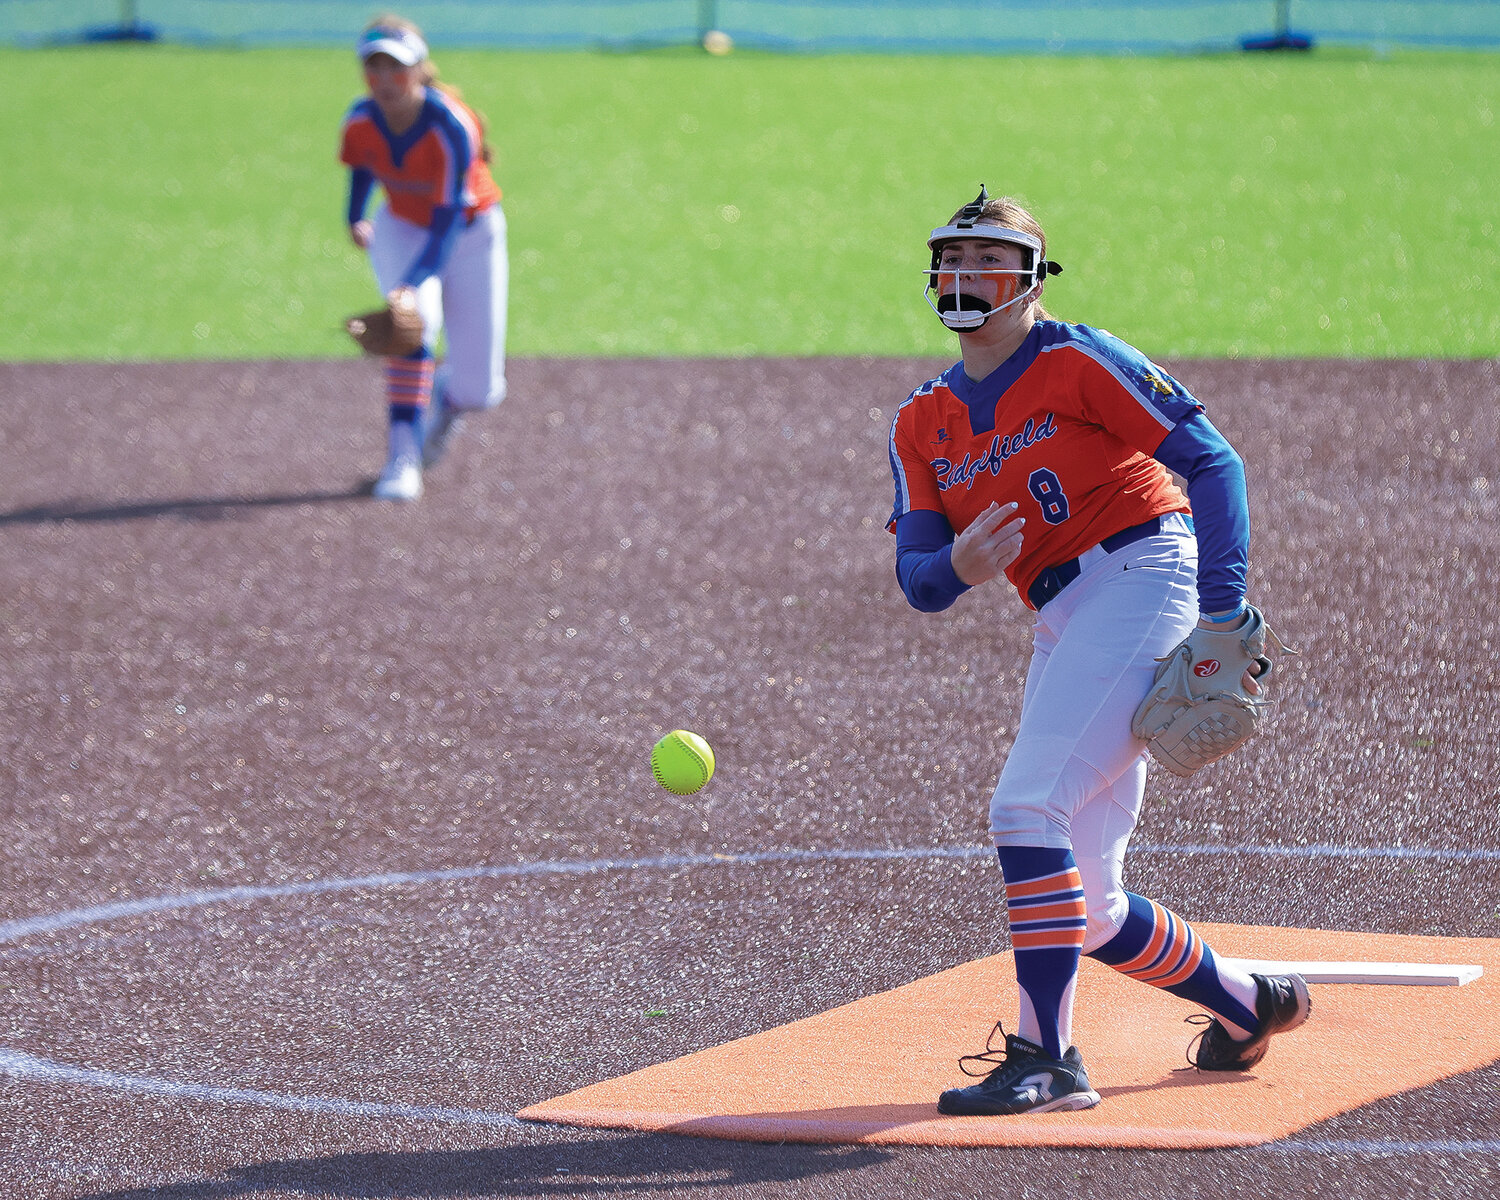 Ridgefield's Elizabeth Peery fires in a pitch during the team's win against Hockinson on Wednesday, April 19.